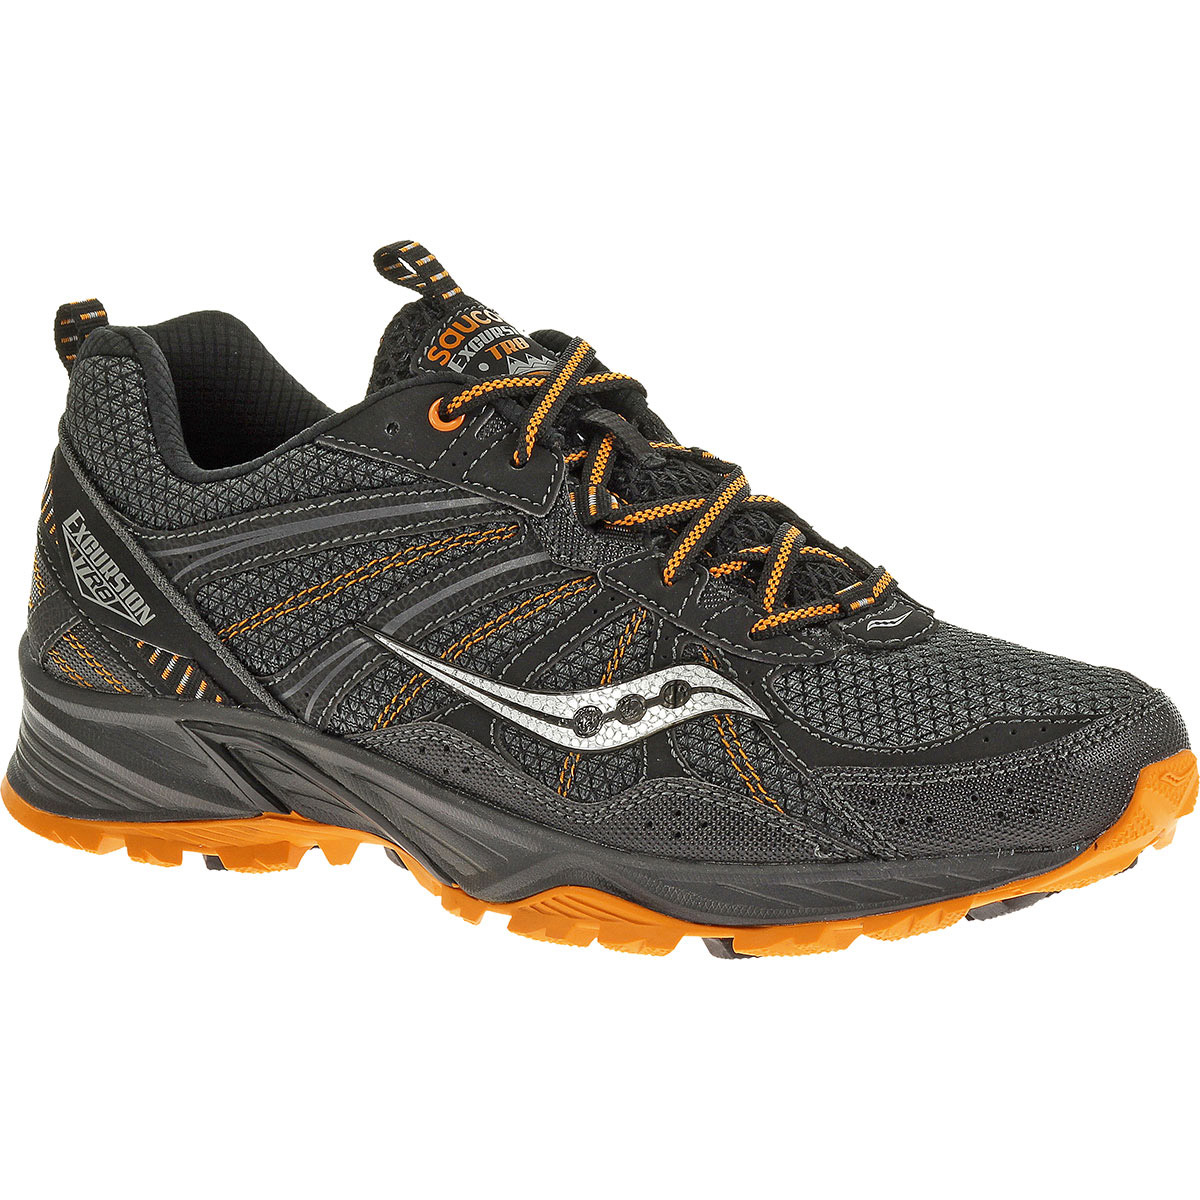 Excursion TR8 Trail Running Shoes 